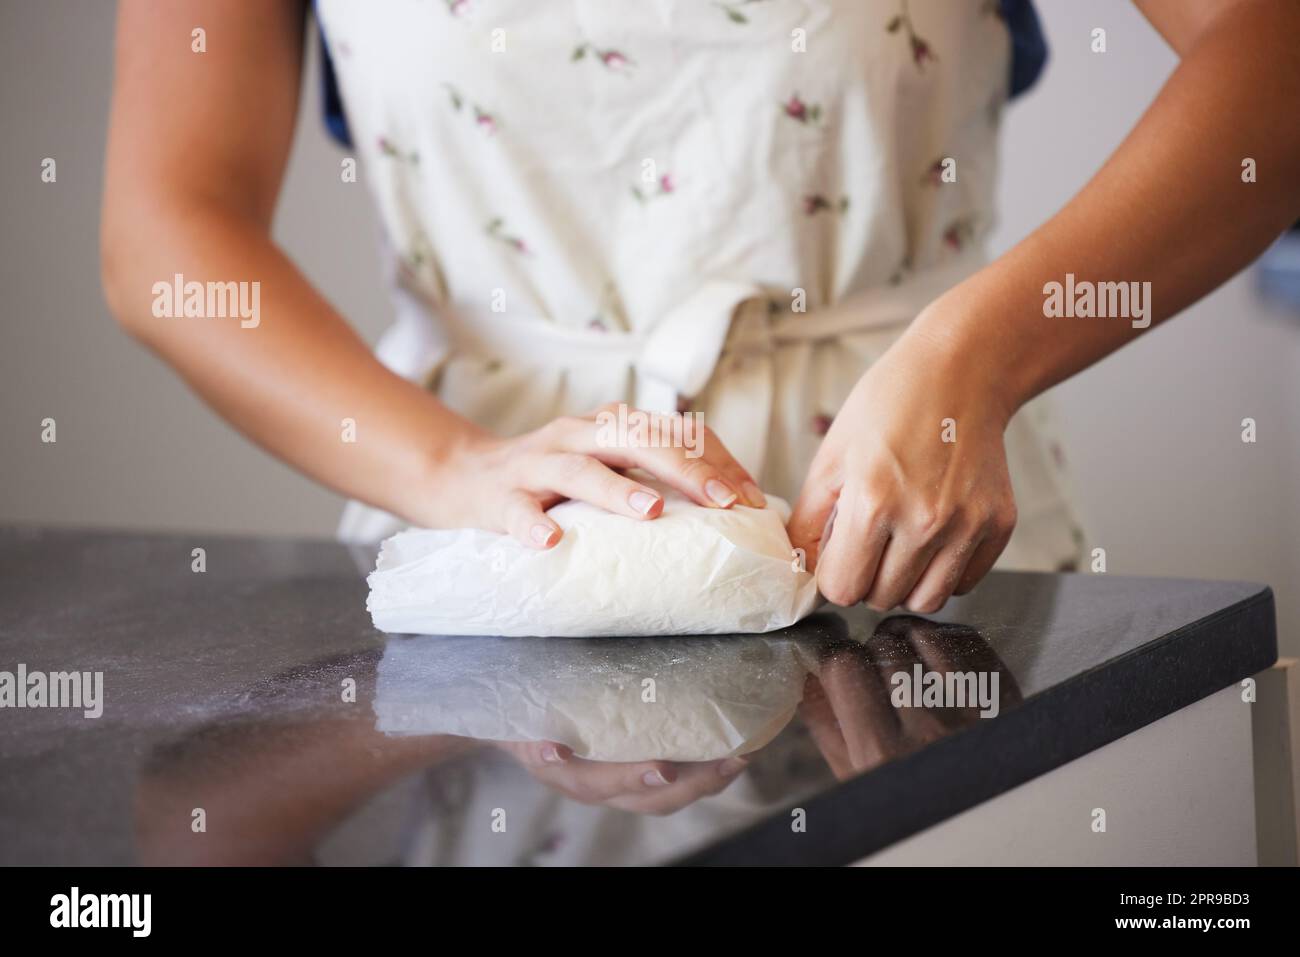 Take care of your body. a unrecognizable female baking in the kitchen at home. Stock Photo